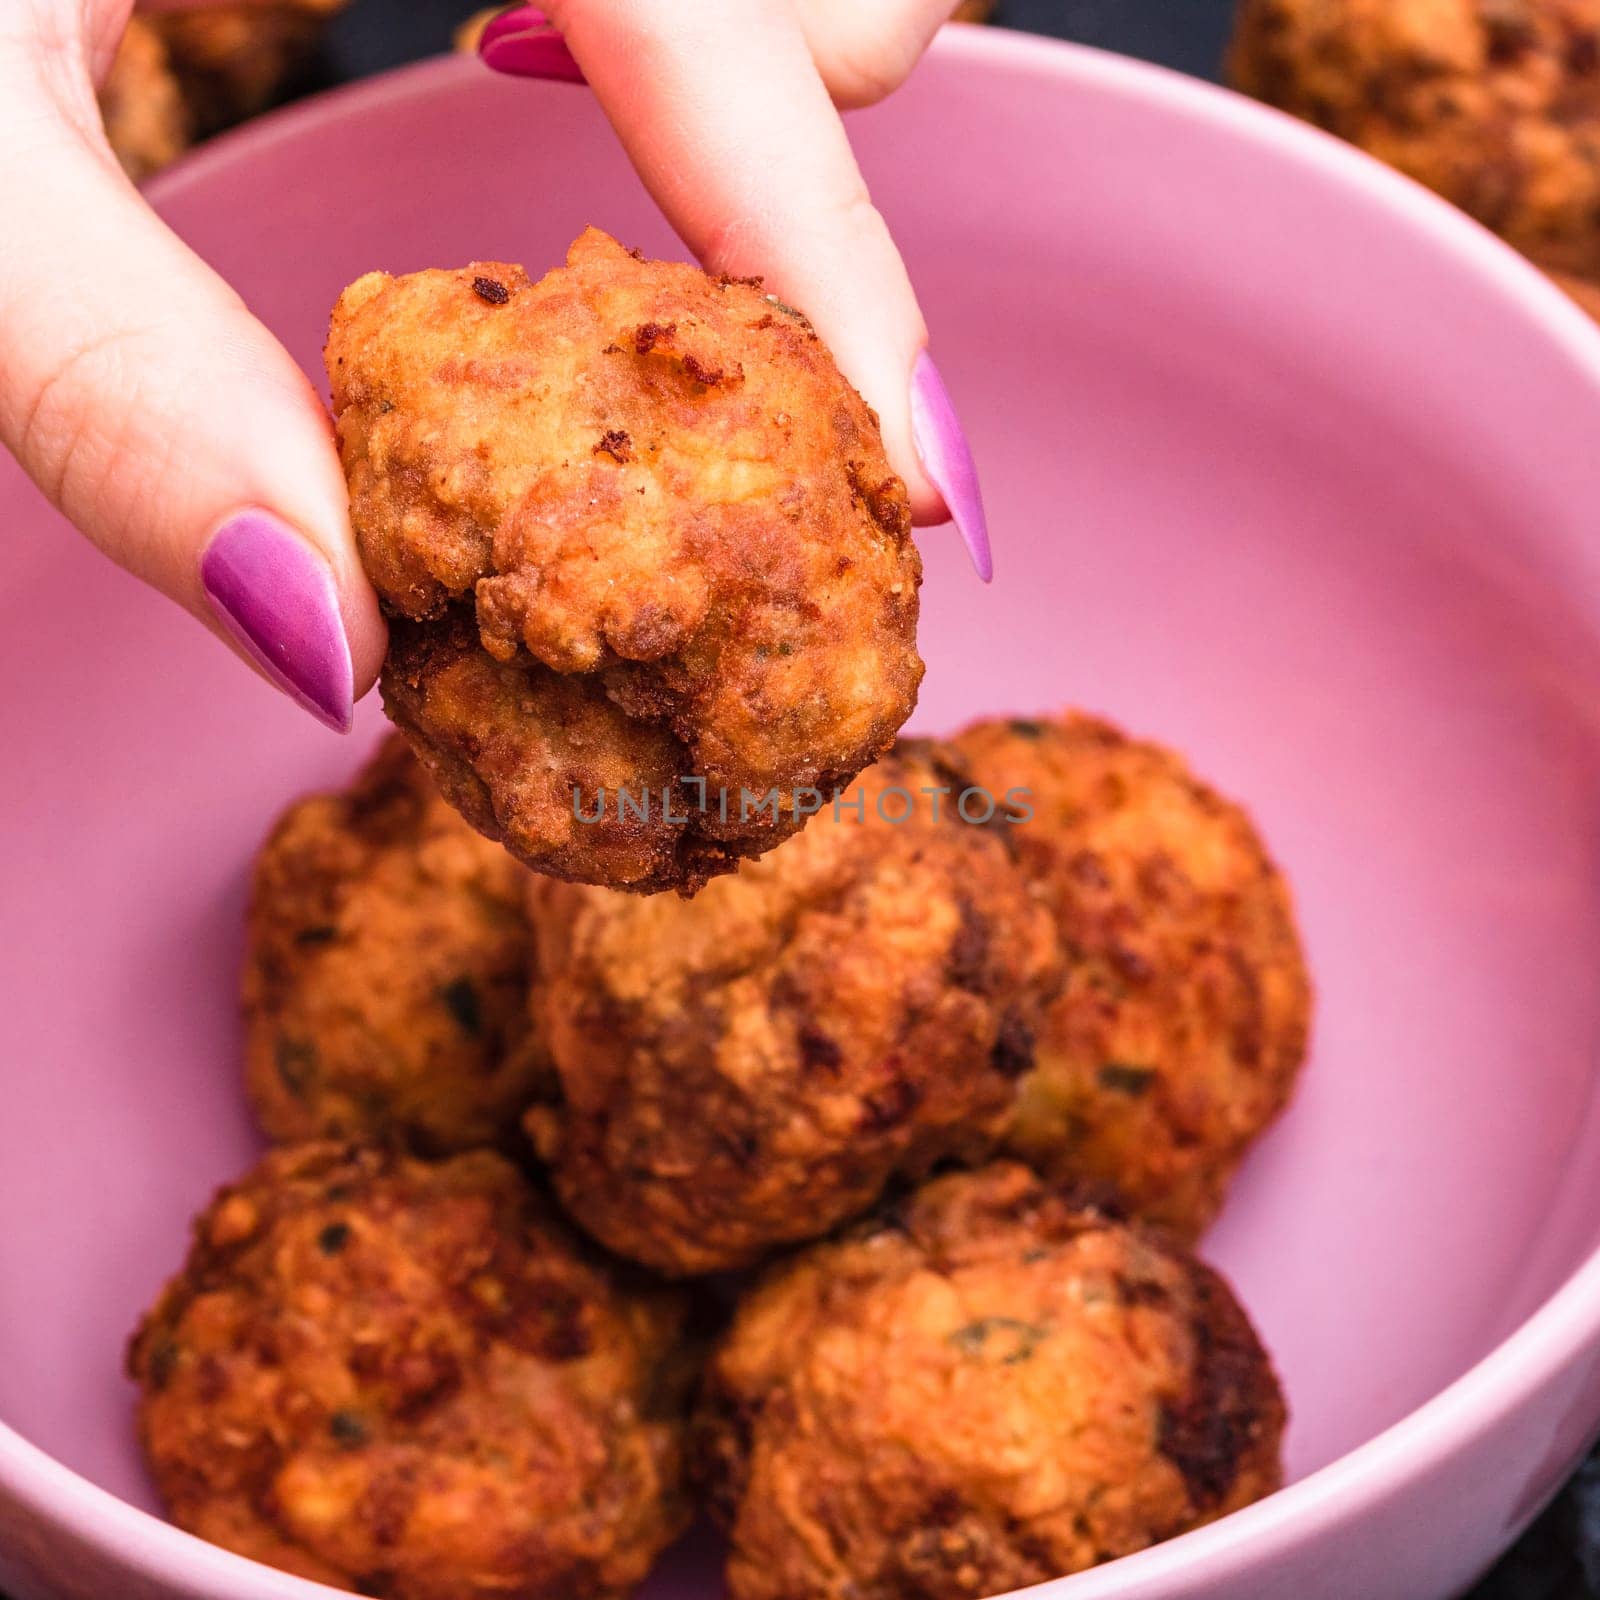 Pink bowl with fried meatballs with spices. Homemade food. Hand holding a fried meatball. by vladispas